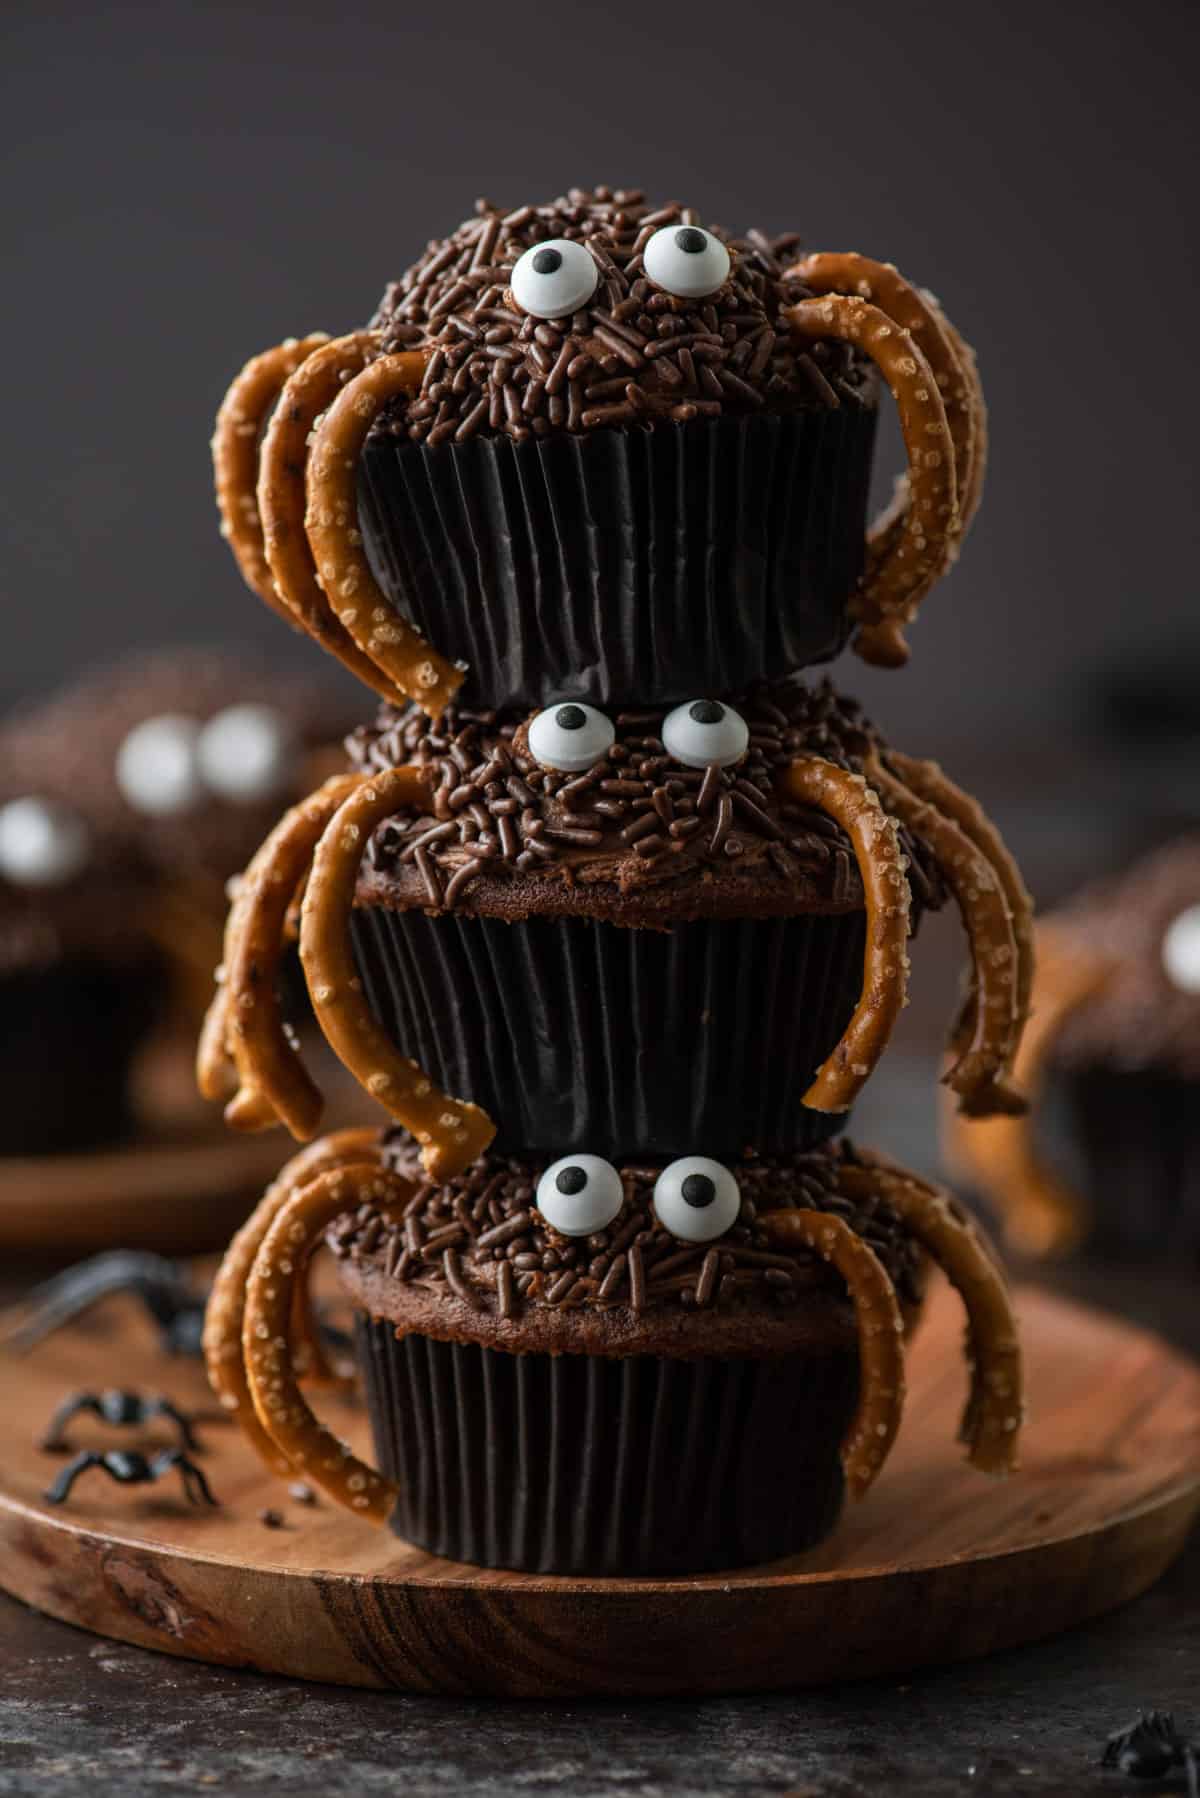 Three spider cupcakes stacked on each other